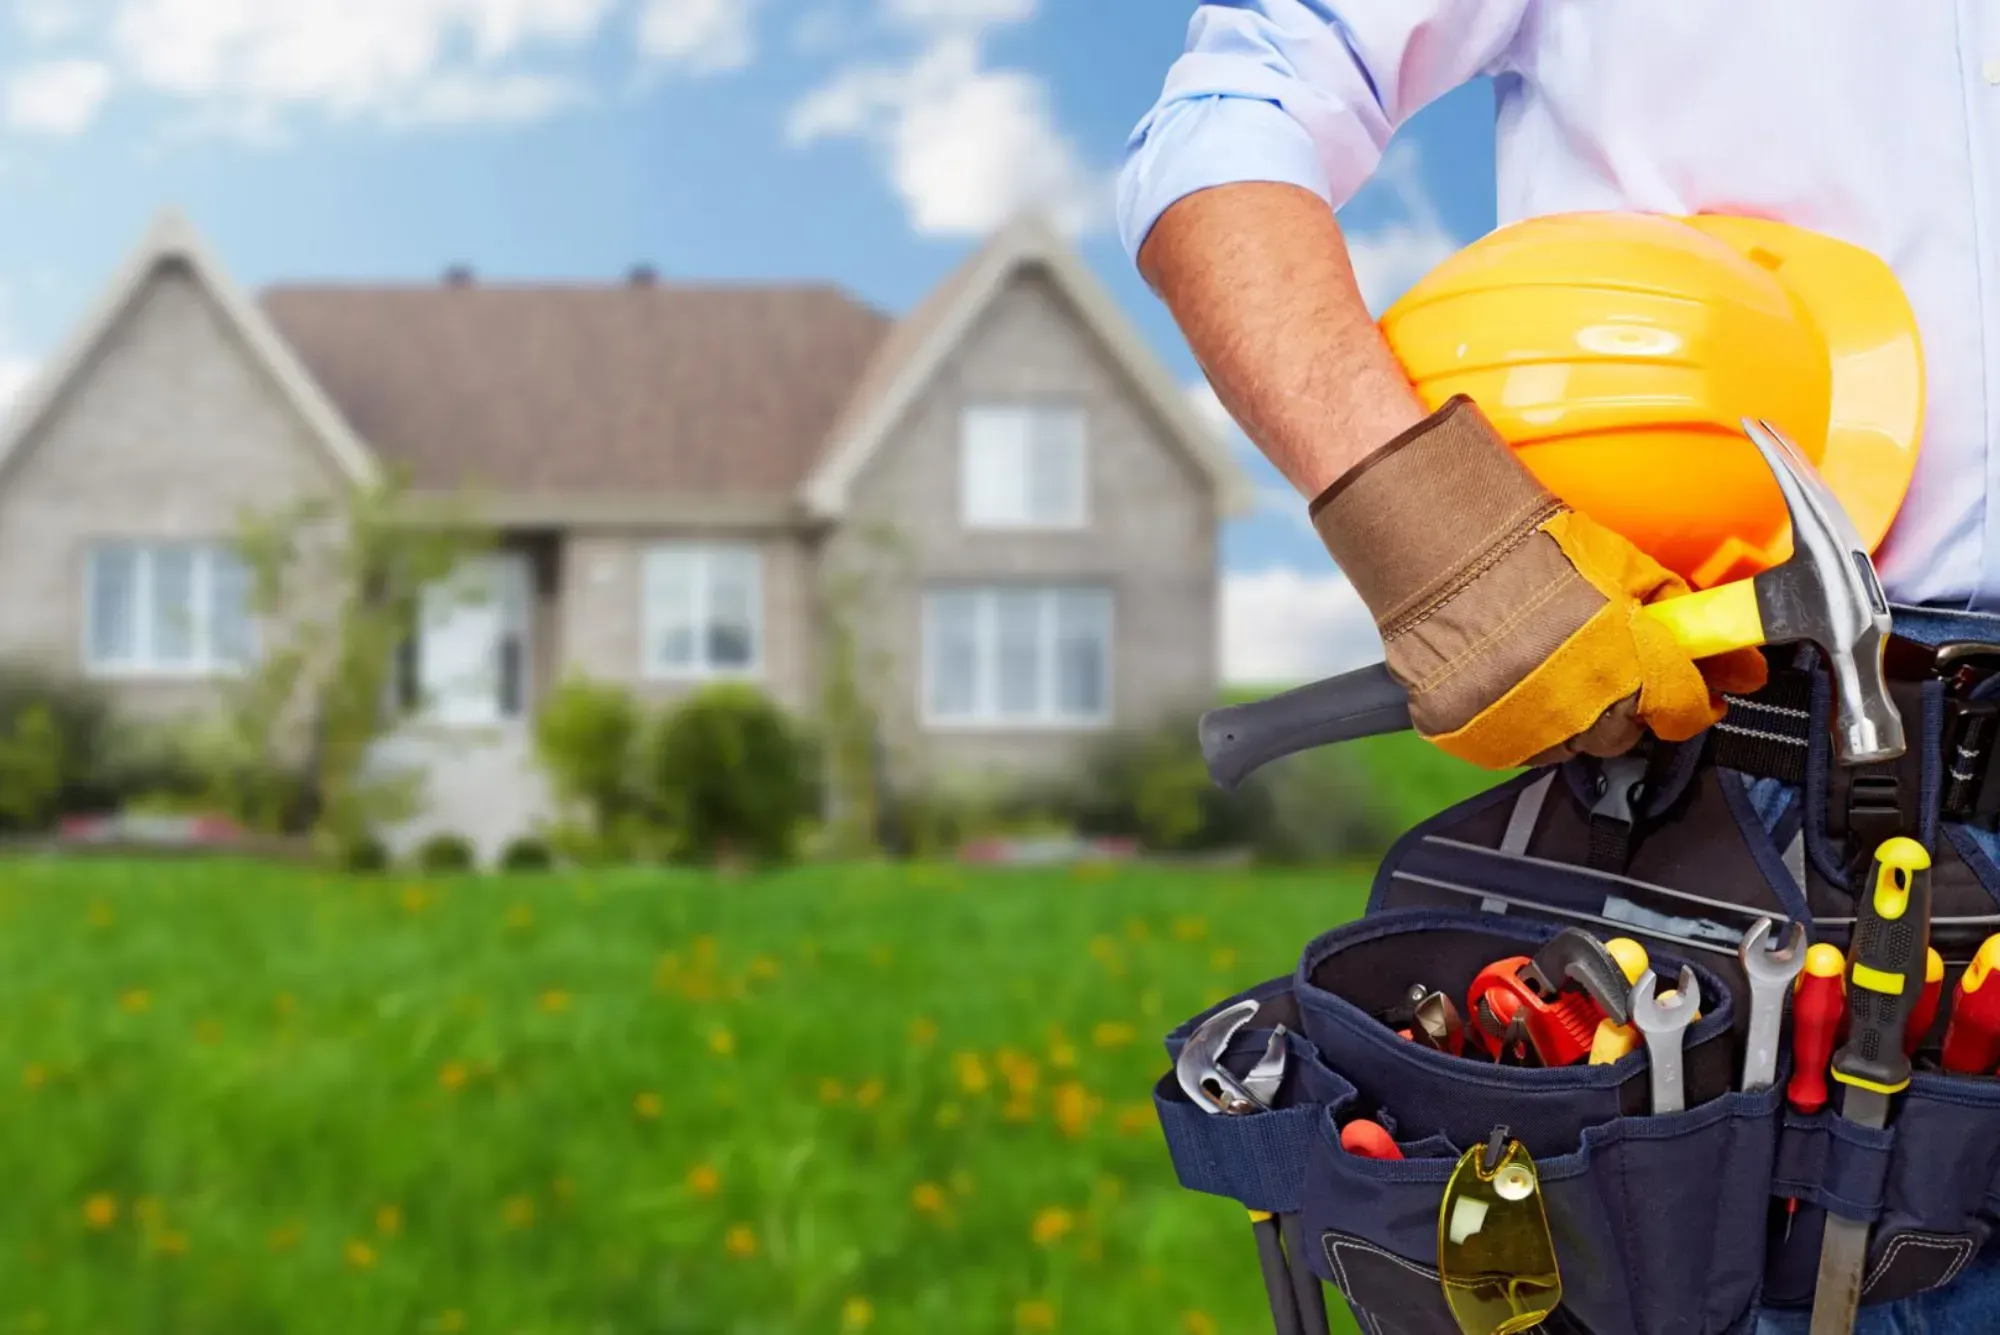 Consumer and Residential Building Maintenance and Upkeep in Dubai